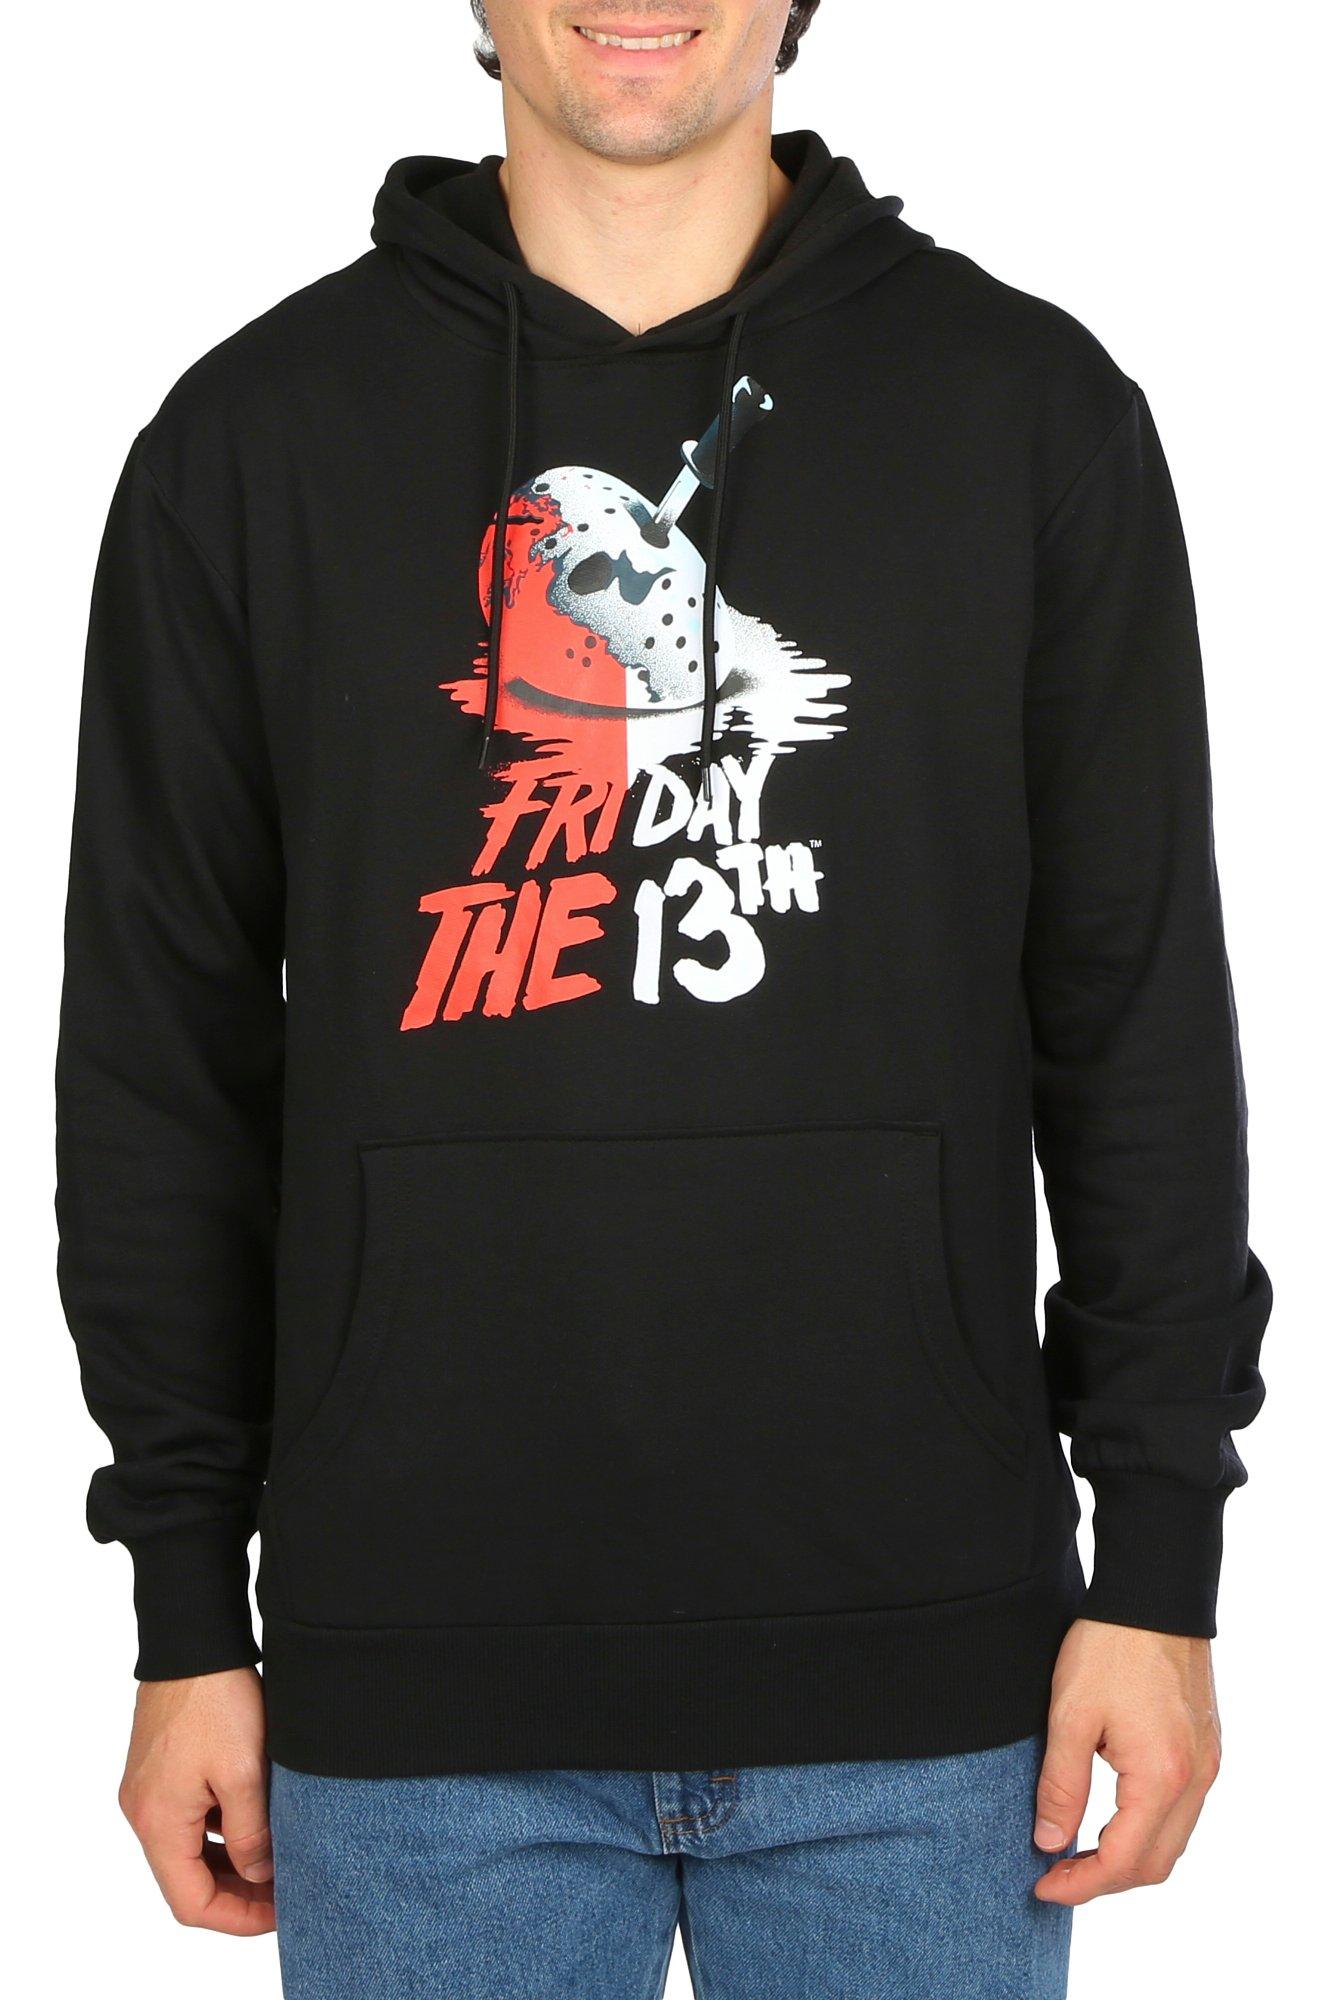 Men's Friday The 13th Graphic Hoodie